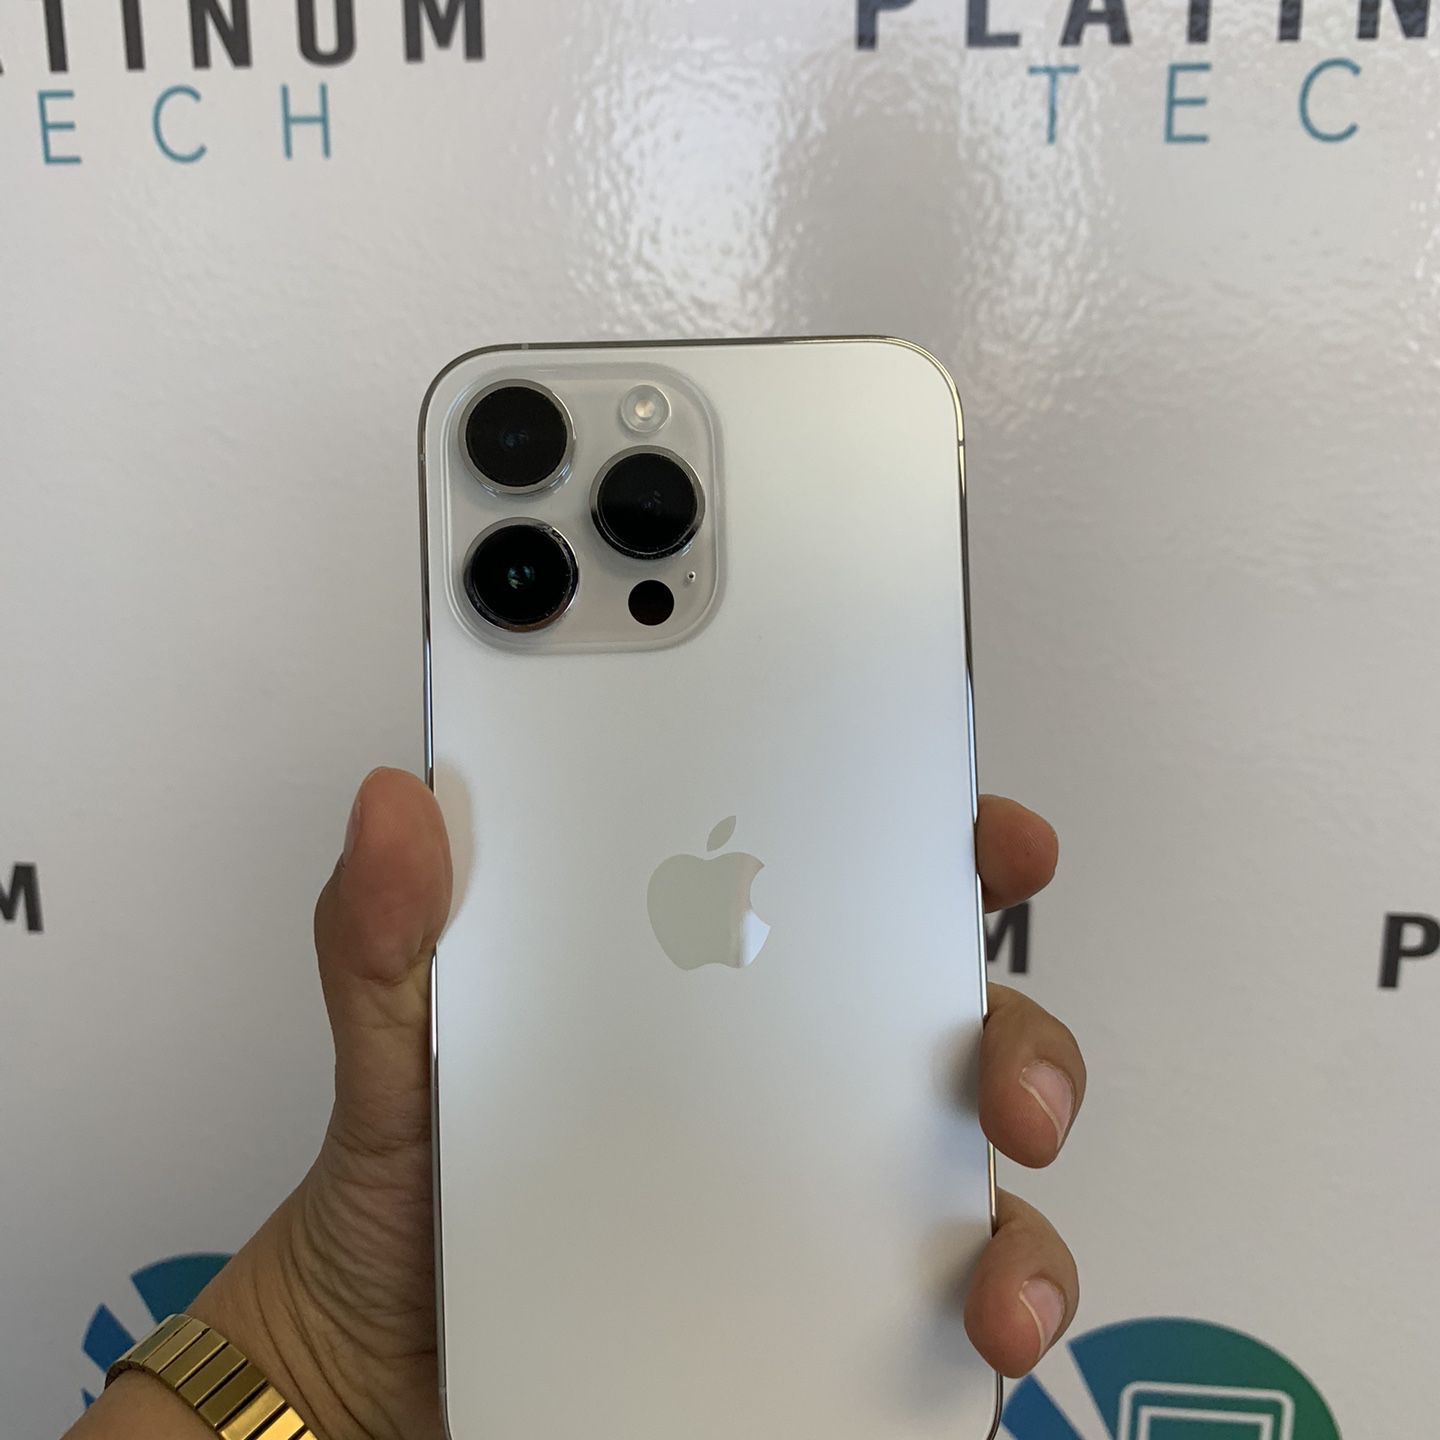 🤍📱 iPhone 14 Pro Max 256 GB Unlocked BH91% 🔋 Case And Headphones For Free 🤩‼️